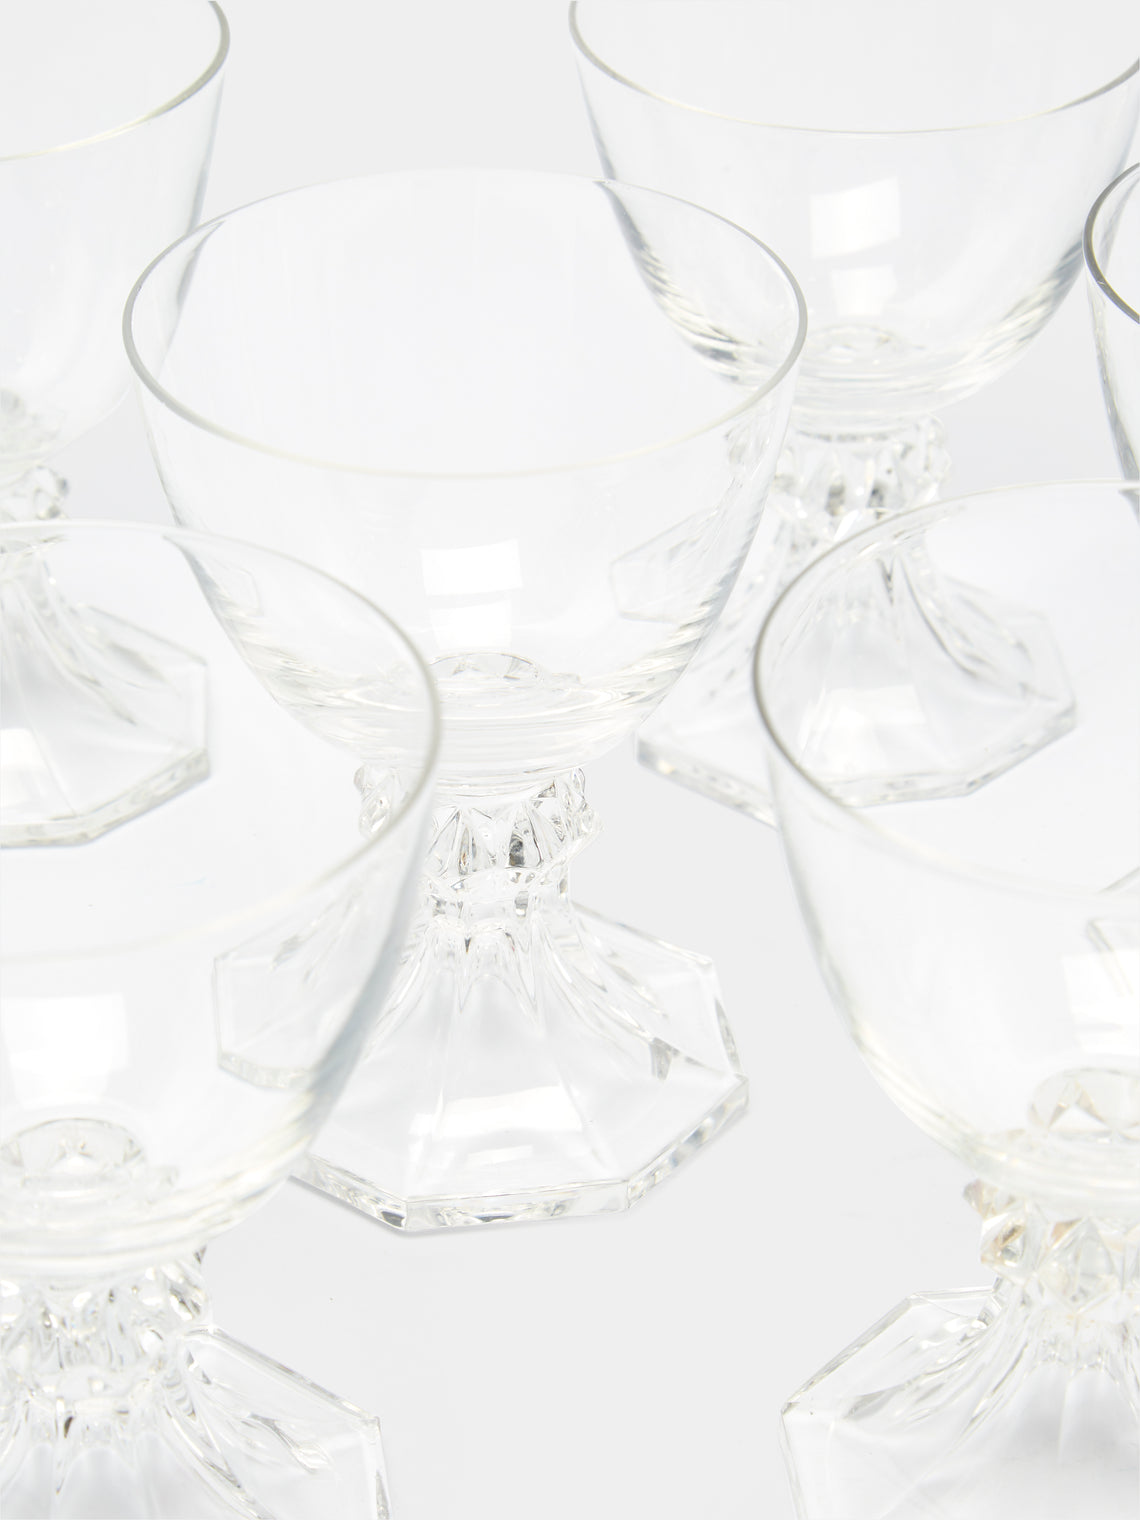 Antique and Vintage - 1930s Val Saint Lambert Crystal Wine Glasses (Set of 10) - Clear - ABASK